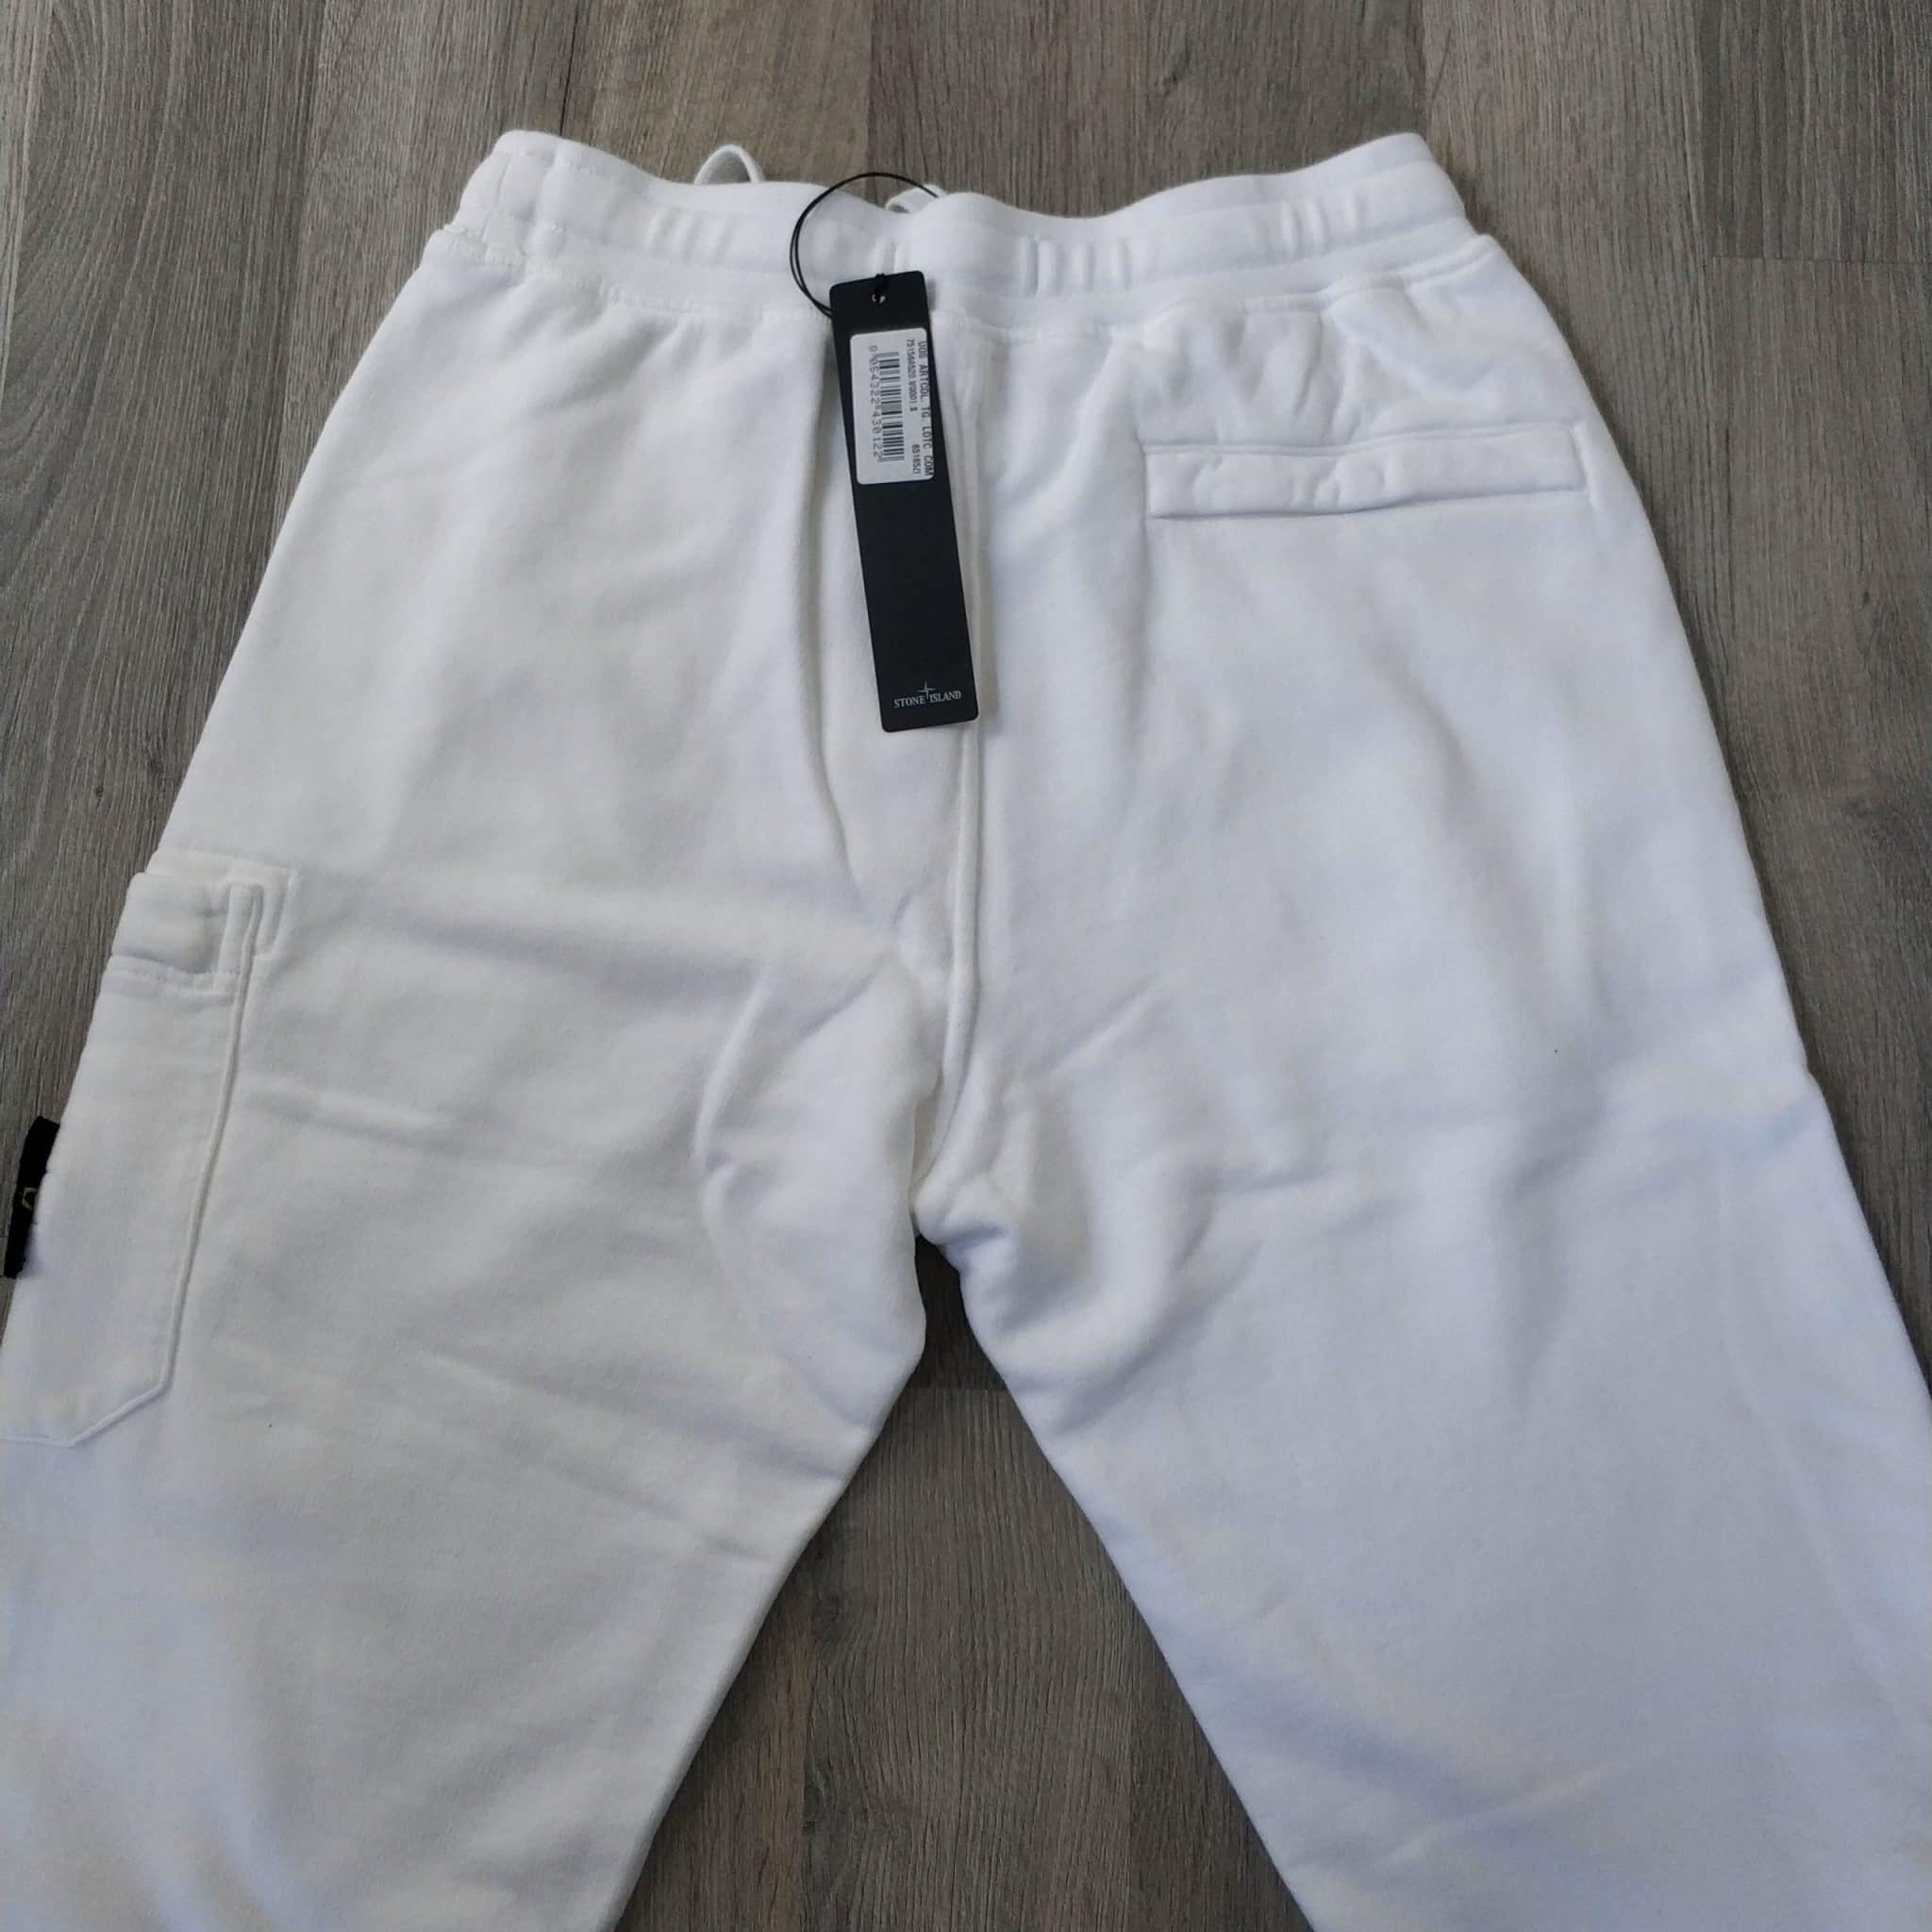 STONE ISLAND FLEECE PANTS TROUSERS WITH PATCH - WHITE - London